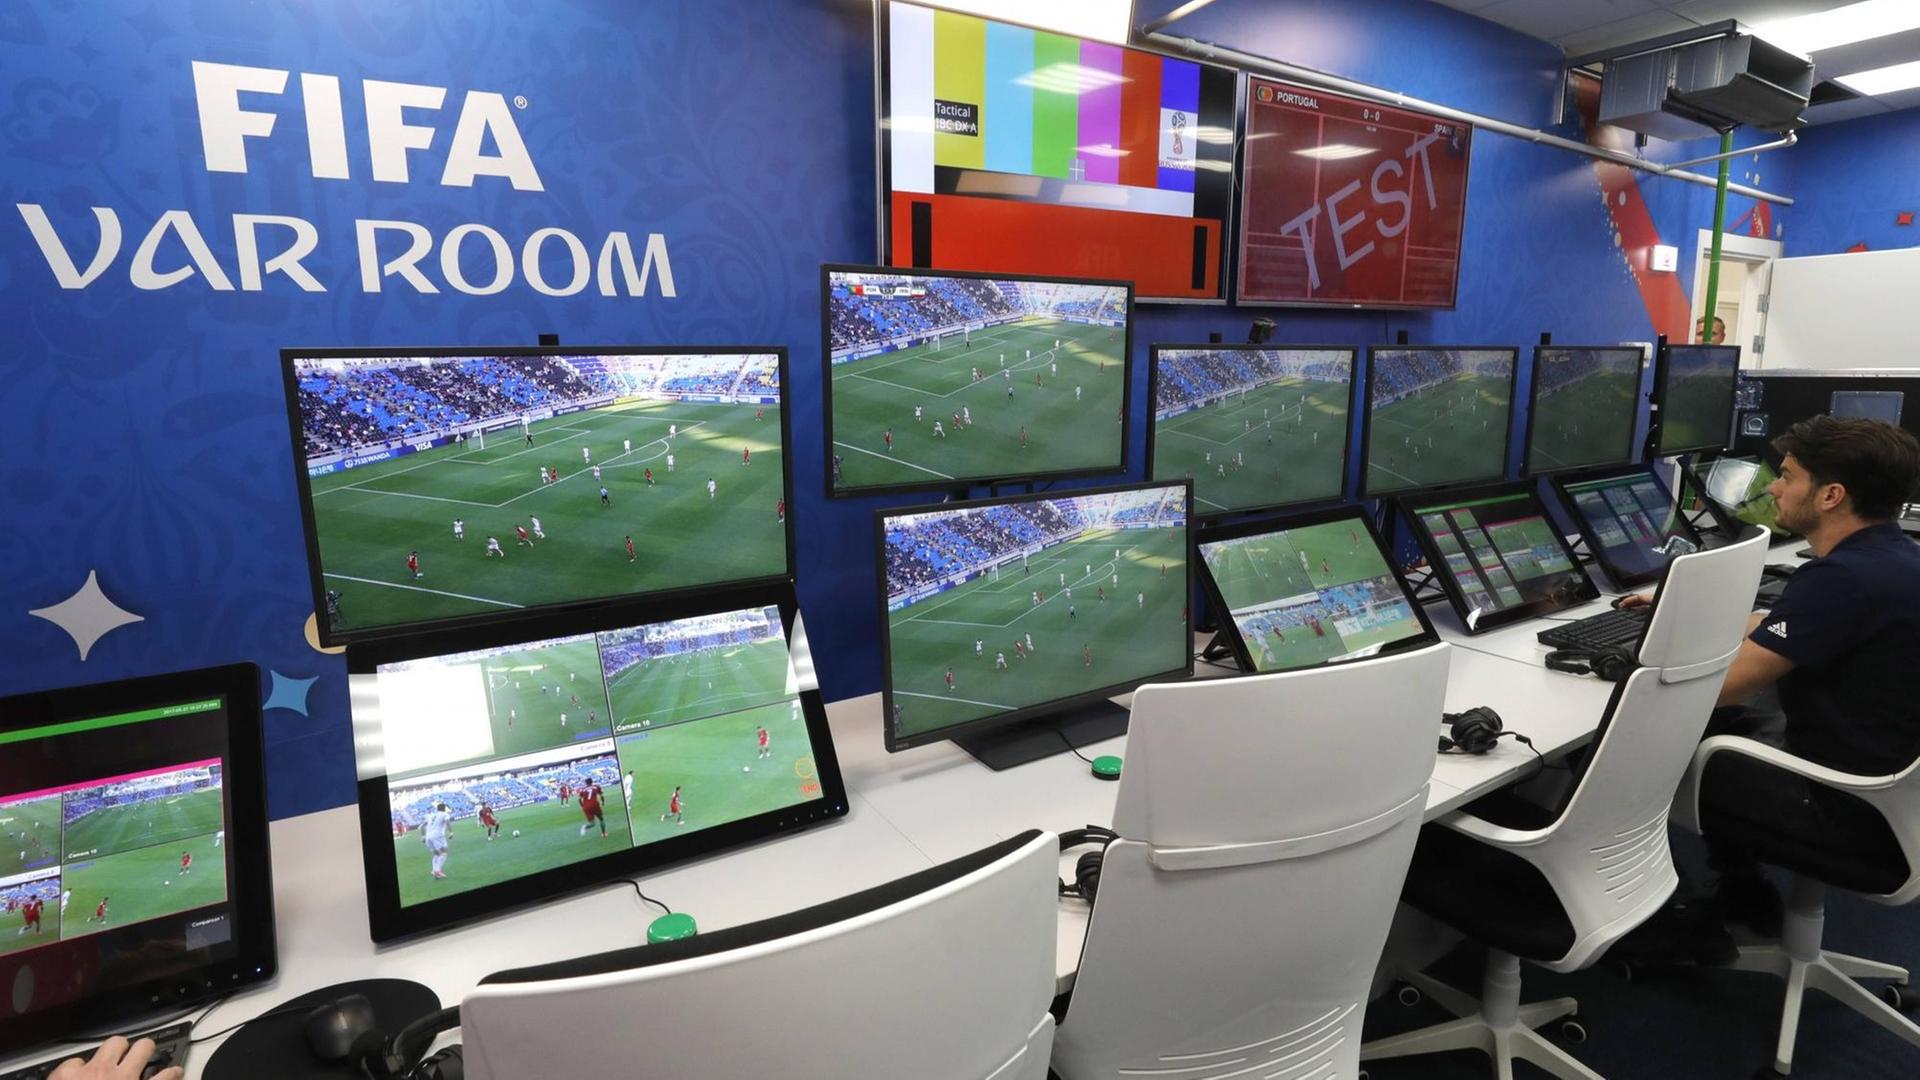 MOSCOW REGION, RUSSIA - JUNE 9, 2018: A FIFA VAR room at the 2018 World Cup International Broadcast Center (IBC) in the Crocus Expo International Exhibition Centre ahead of the upcoming FIFA World Cup WM Weltmeisterschaft Fussball Russia 2018. Mikhail Japaridze/TASS PUBLICATIONxINxGERxAUTxONLY TS08335F